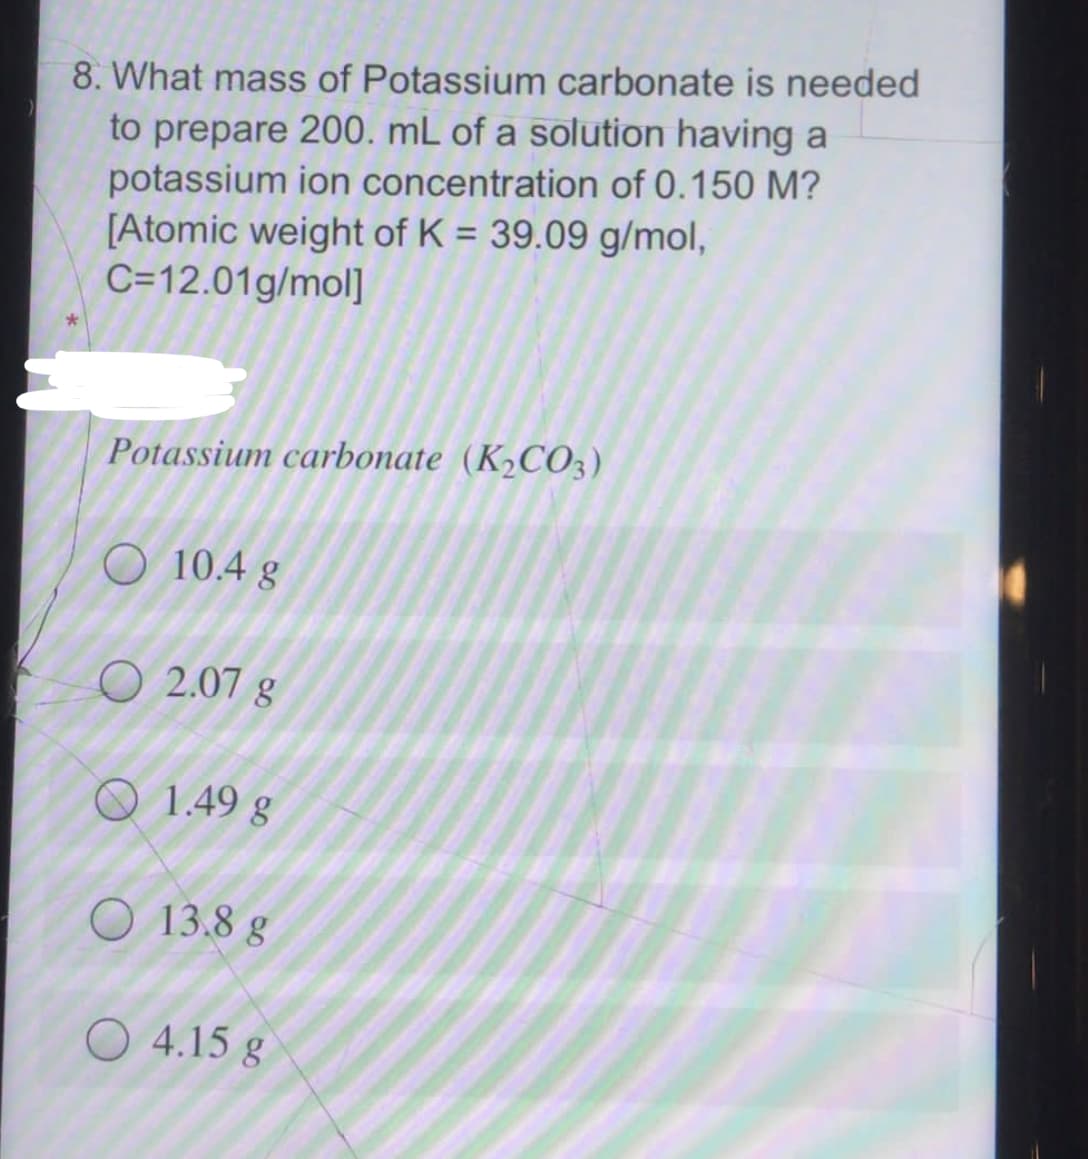 8. What mass of Potassium carbonate is needed
to prepare 200. mL of a solution having a
potassium ion concentration of 0.150 M?
[Atomic weight of K = 39.09 g/mol,
C=12.01g/mol]
%3D
Potassium carbonate (K2CO3)
O 10.4 g
O 2.07 g
O 1.49 g
O 13.8 g
O 4.15 g
